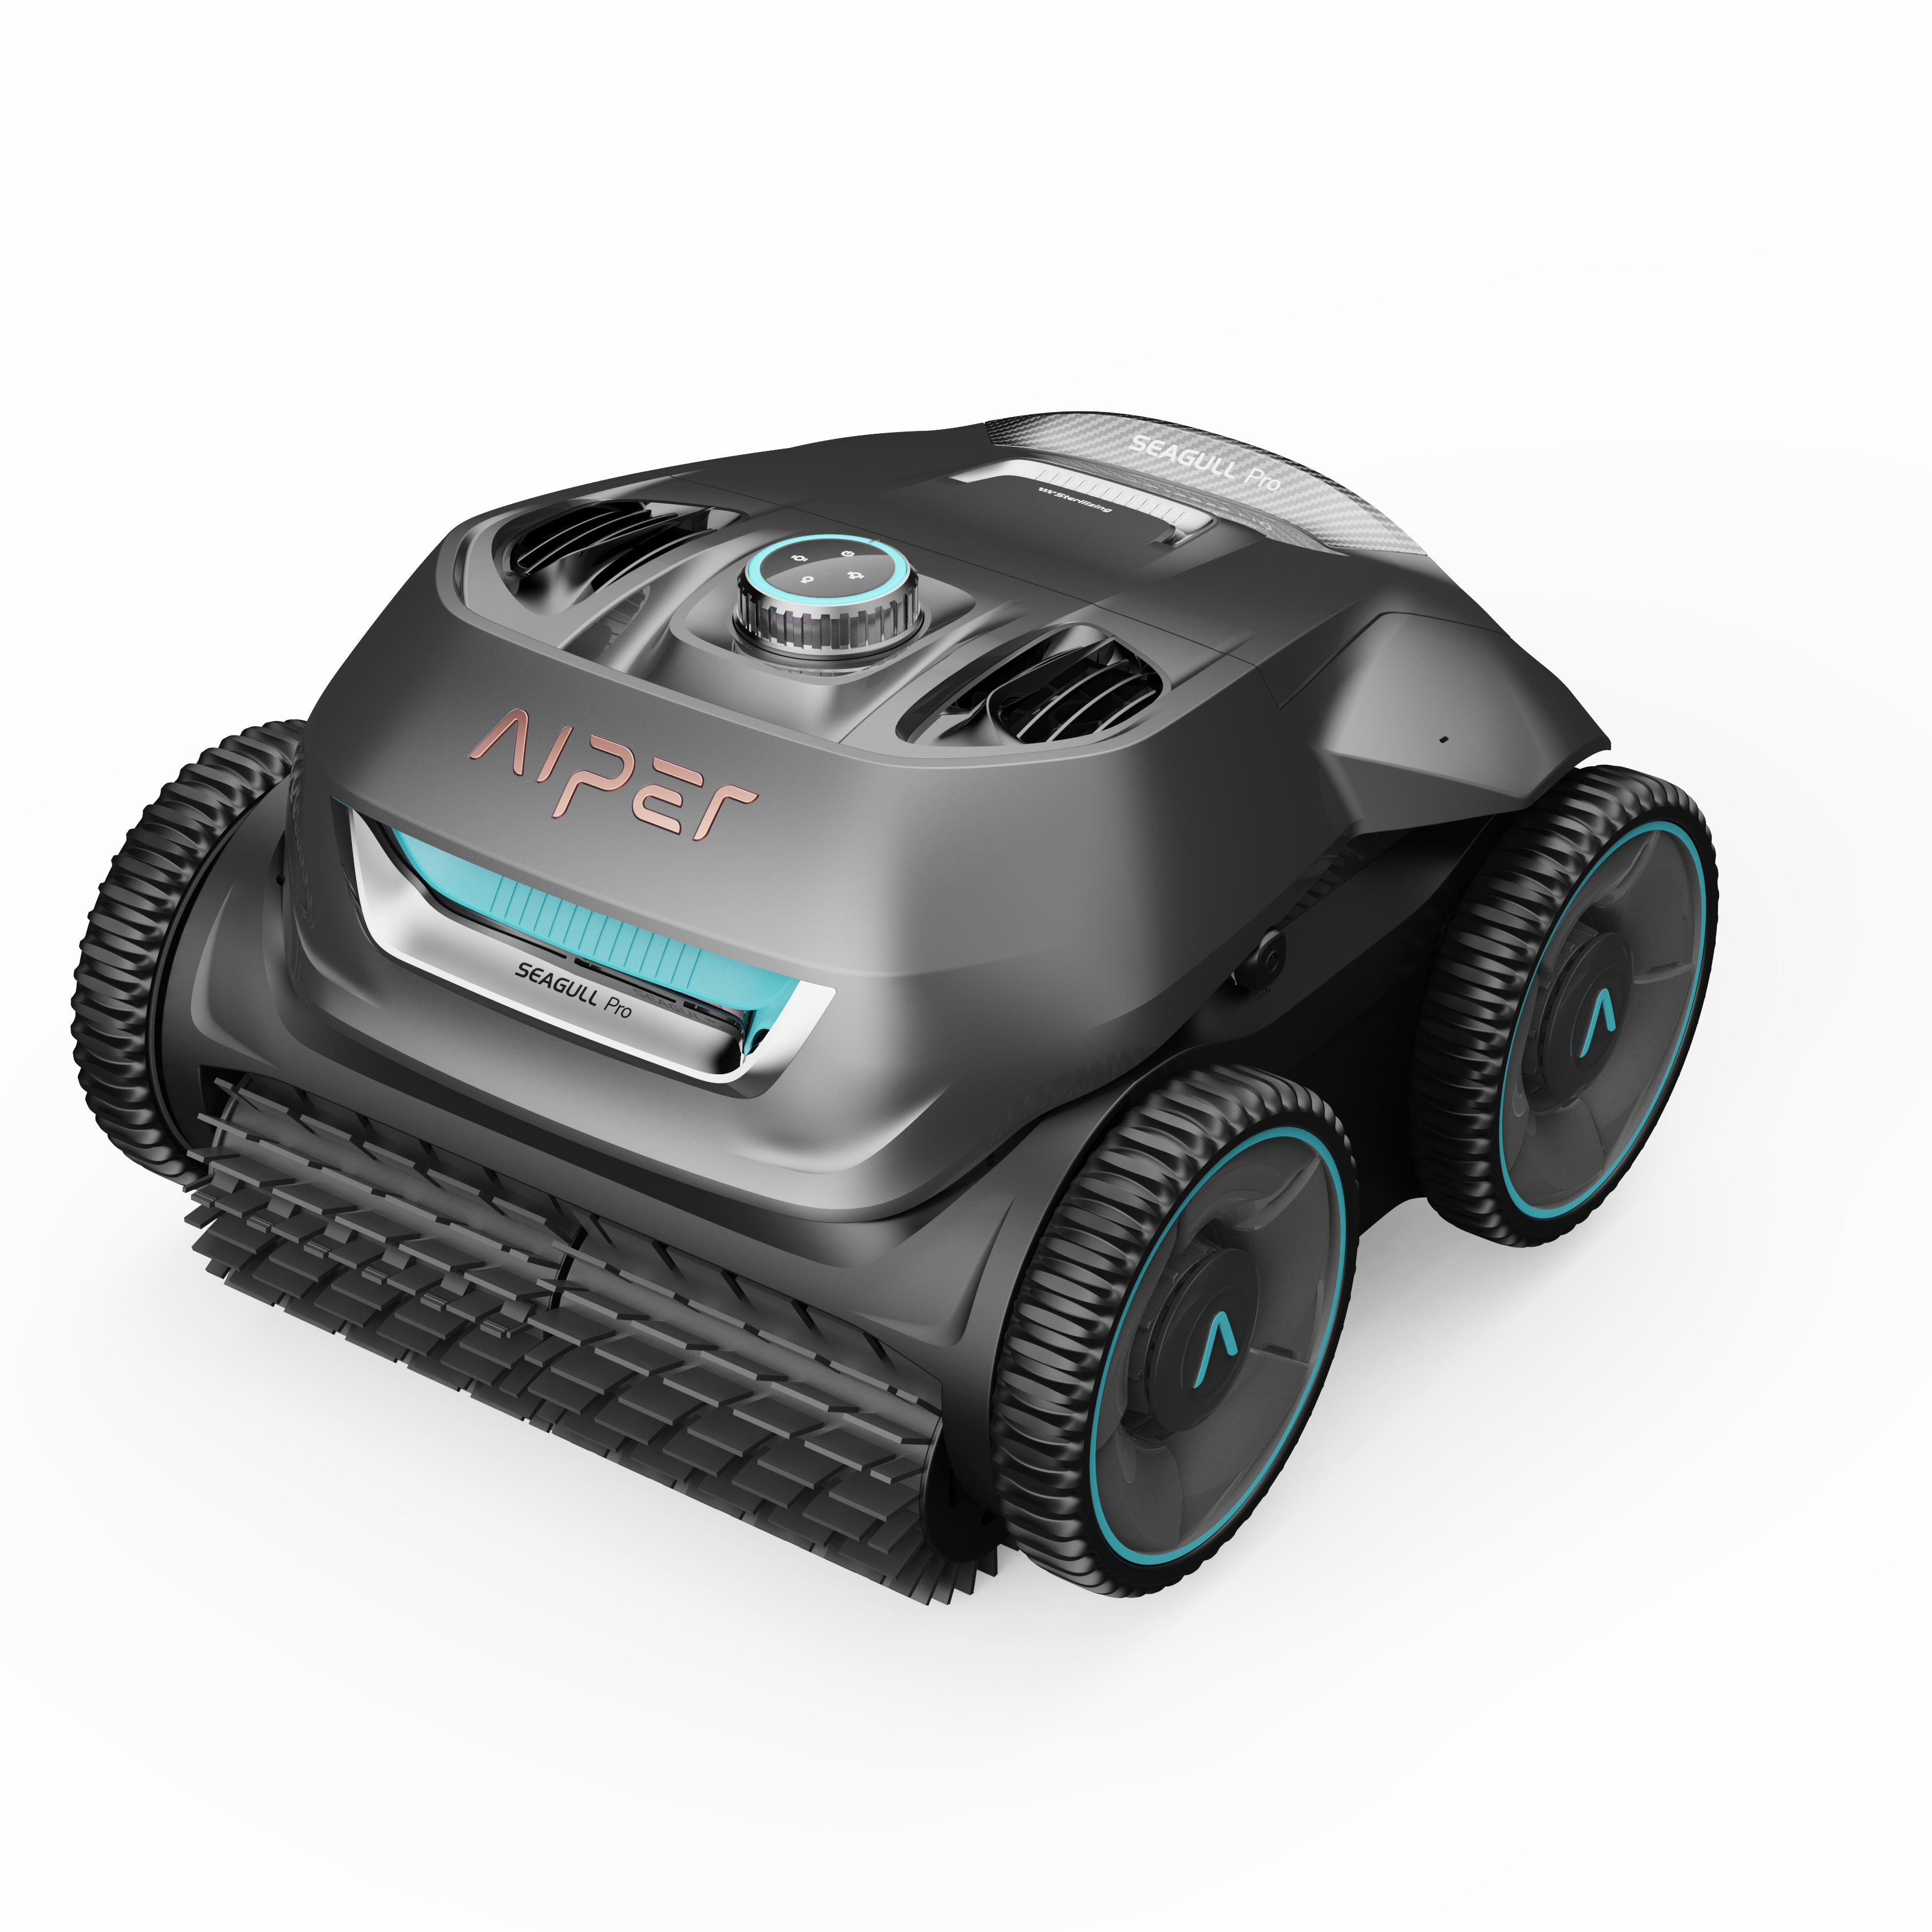 Aiper Seagull Pro robot pool cleaner cleaning pool walls & floor, from daisy Pools.